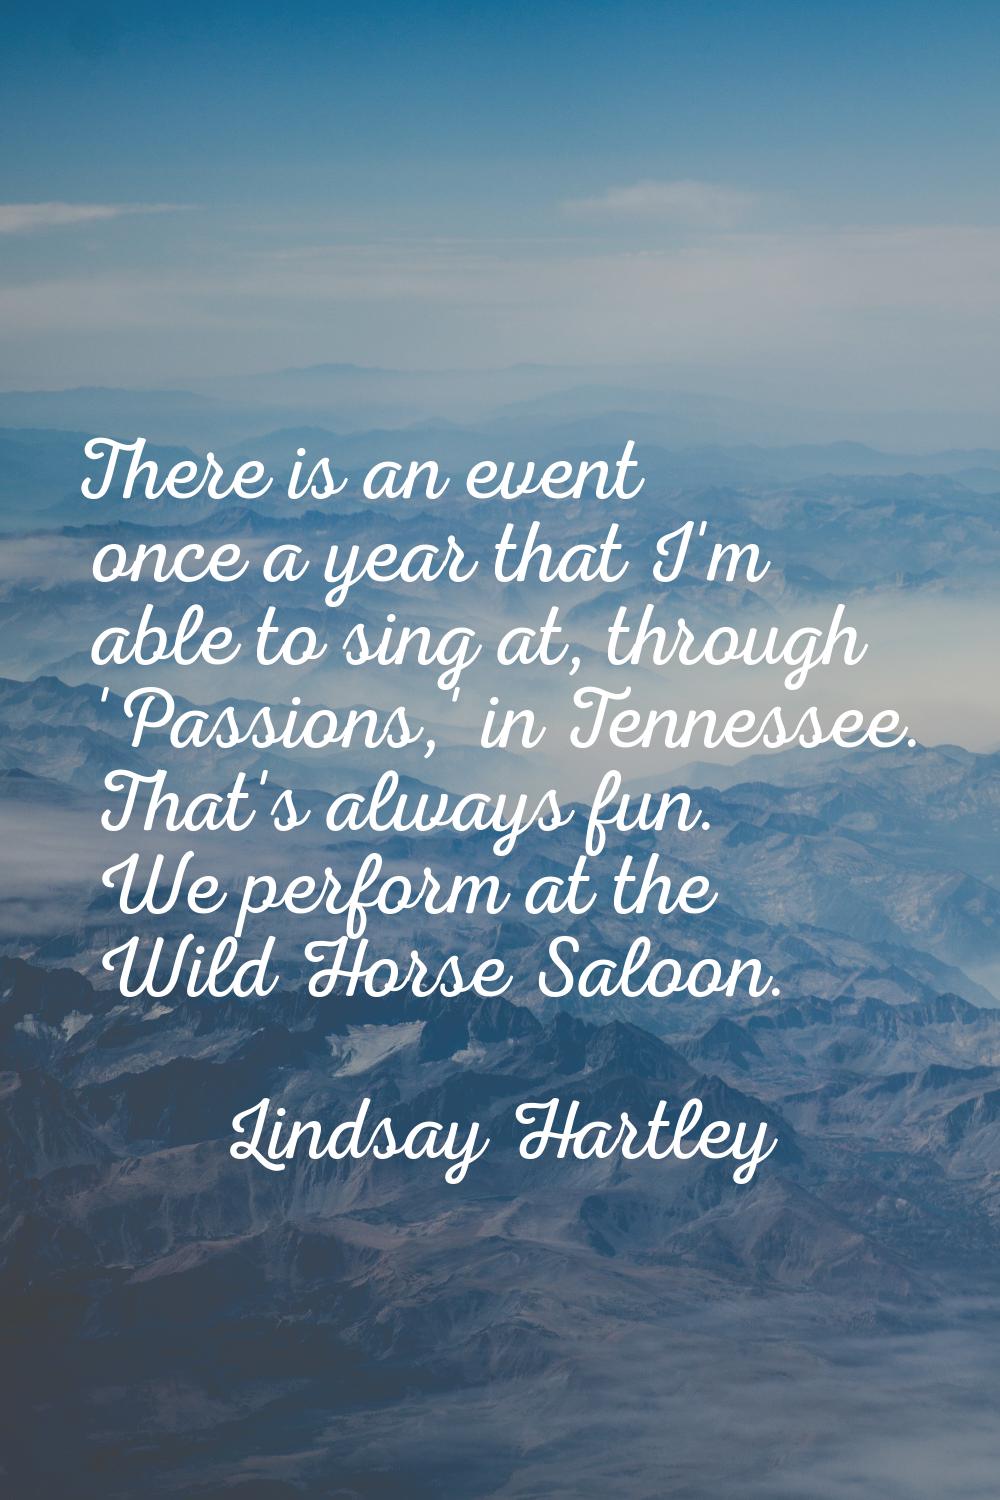 There is an event once a year that I'm able to sing at, through 'Passions,' in Tennessee. That's al